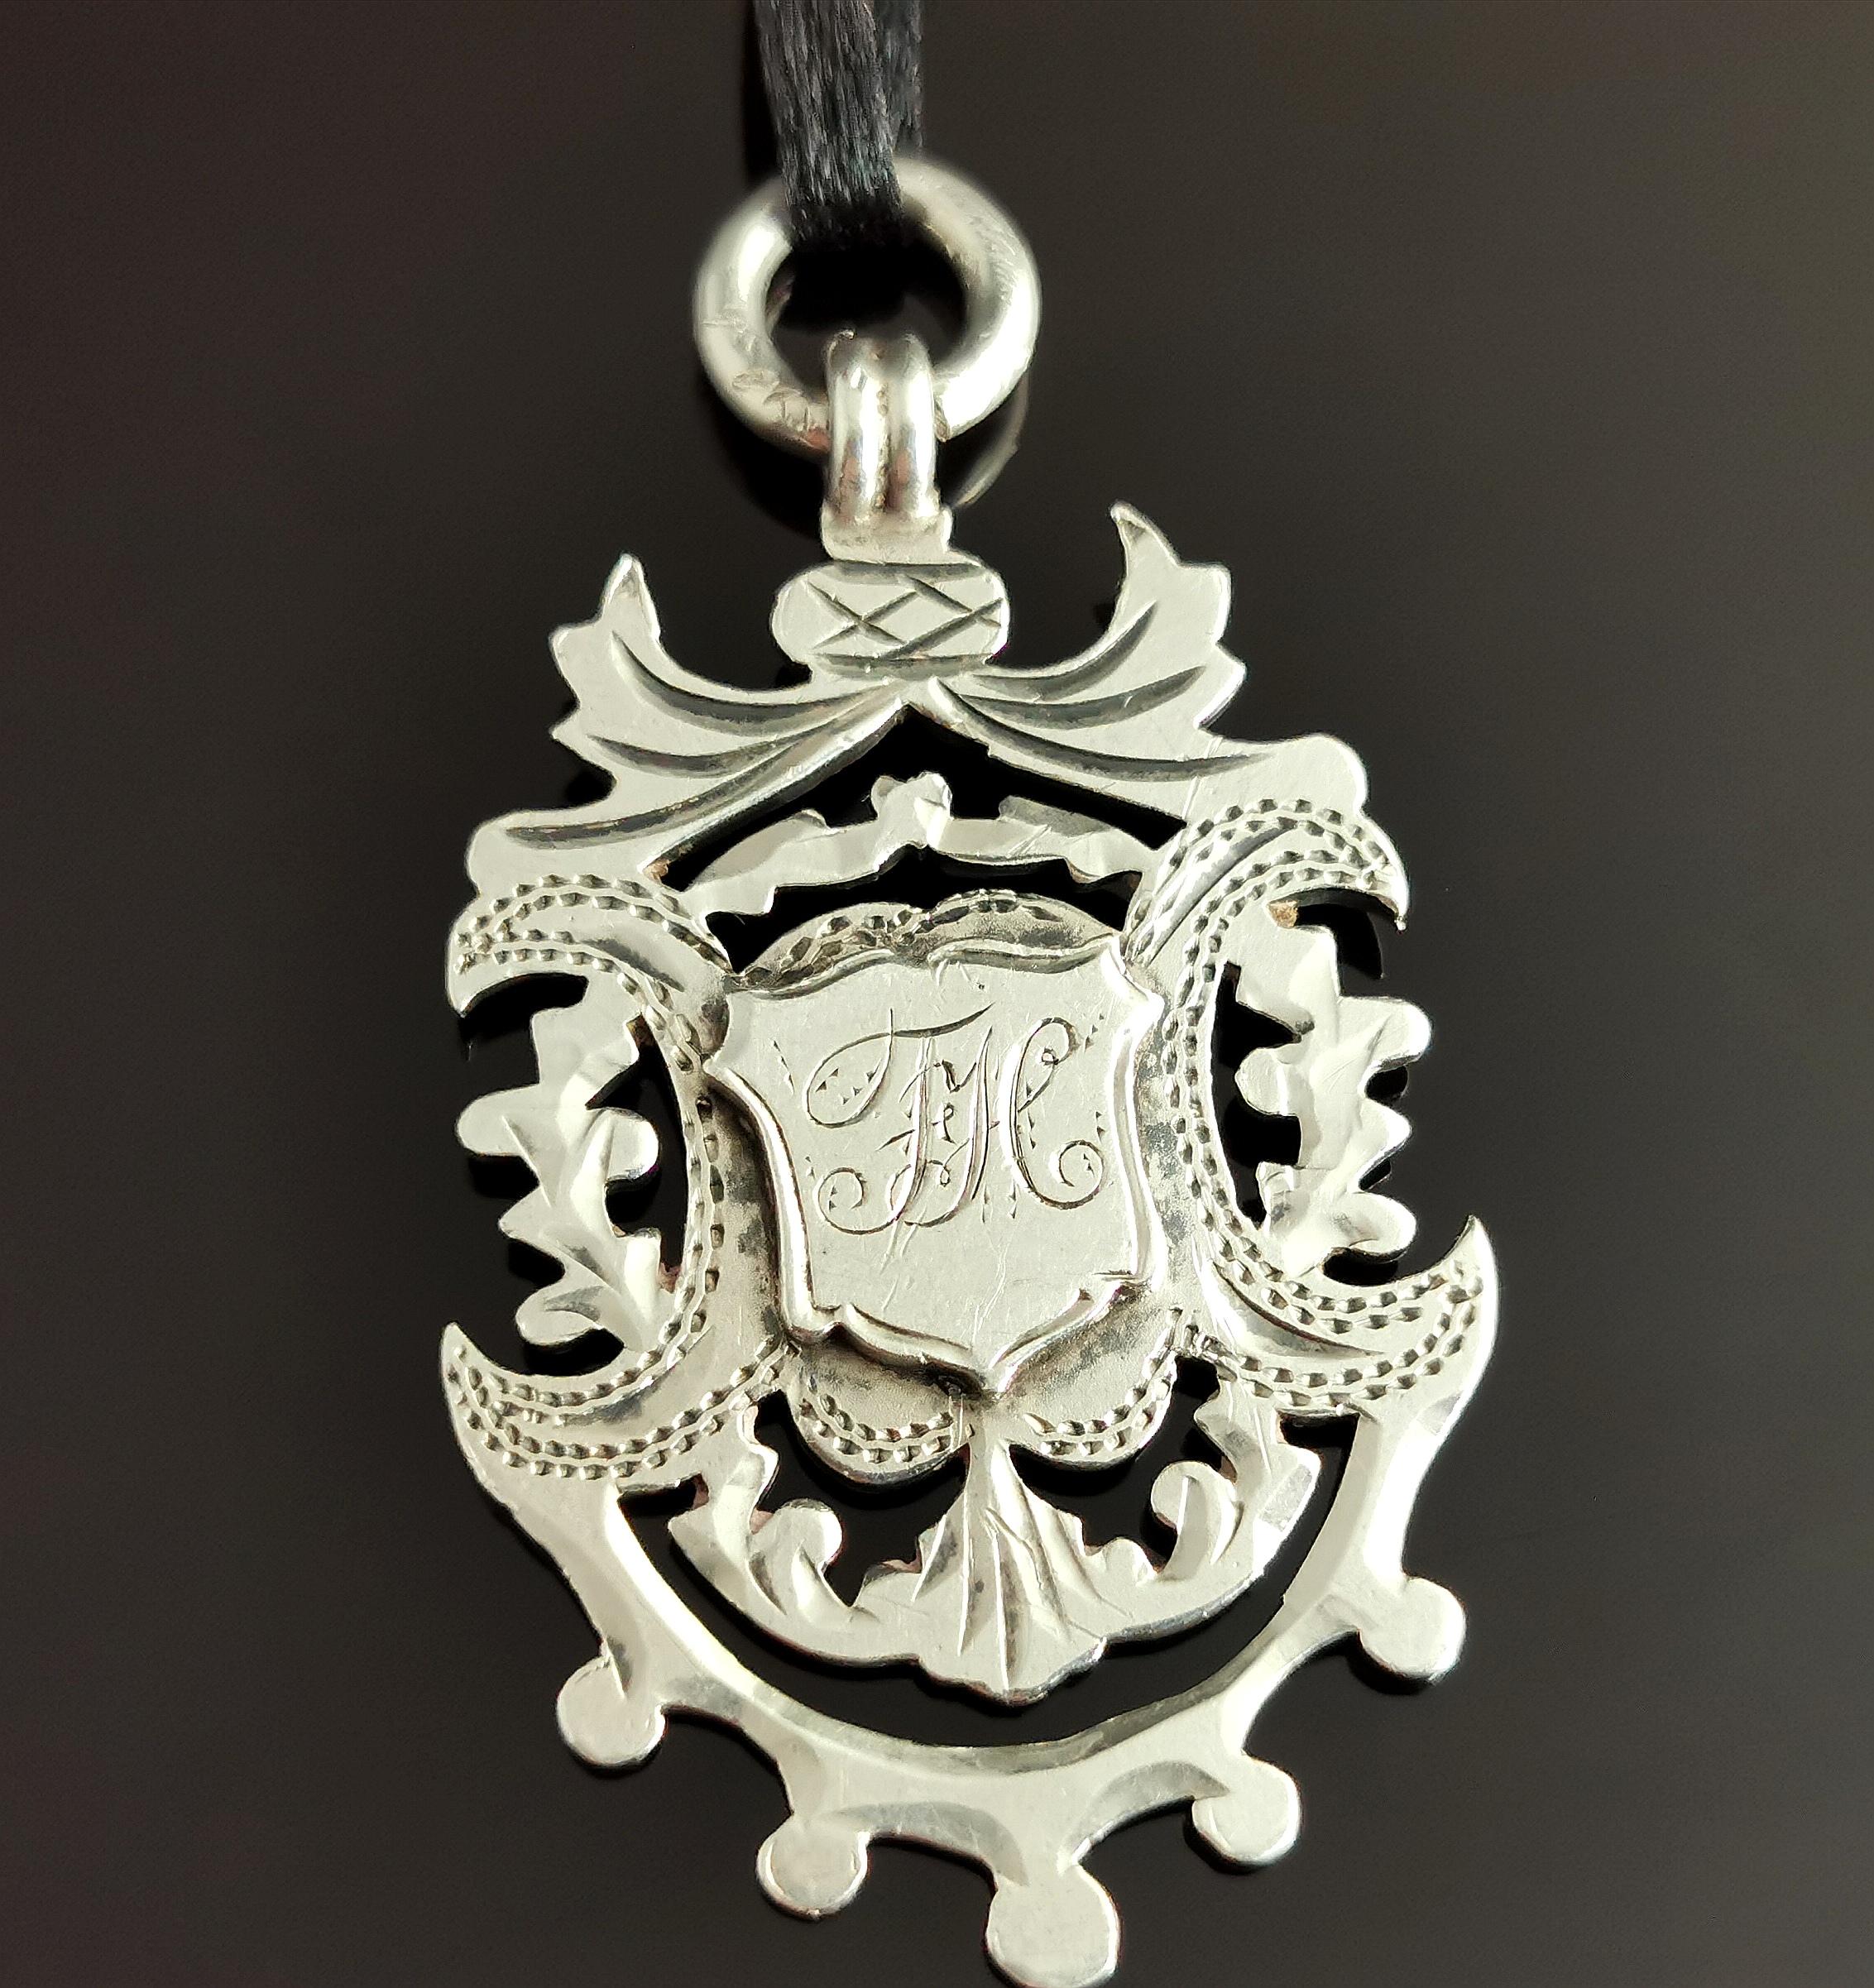 An attractive and elaborate antique sterling silver fob pendant.

A larger fob with a good weight to it, it is a shield shaped piece with a chased, engraved cut out border and a thistle type design to the top.

The fob has a large silver jump ring